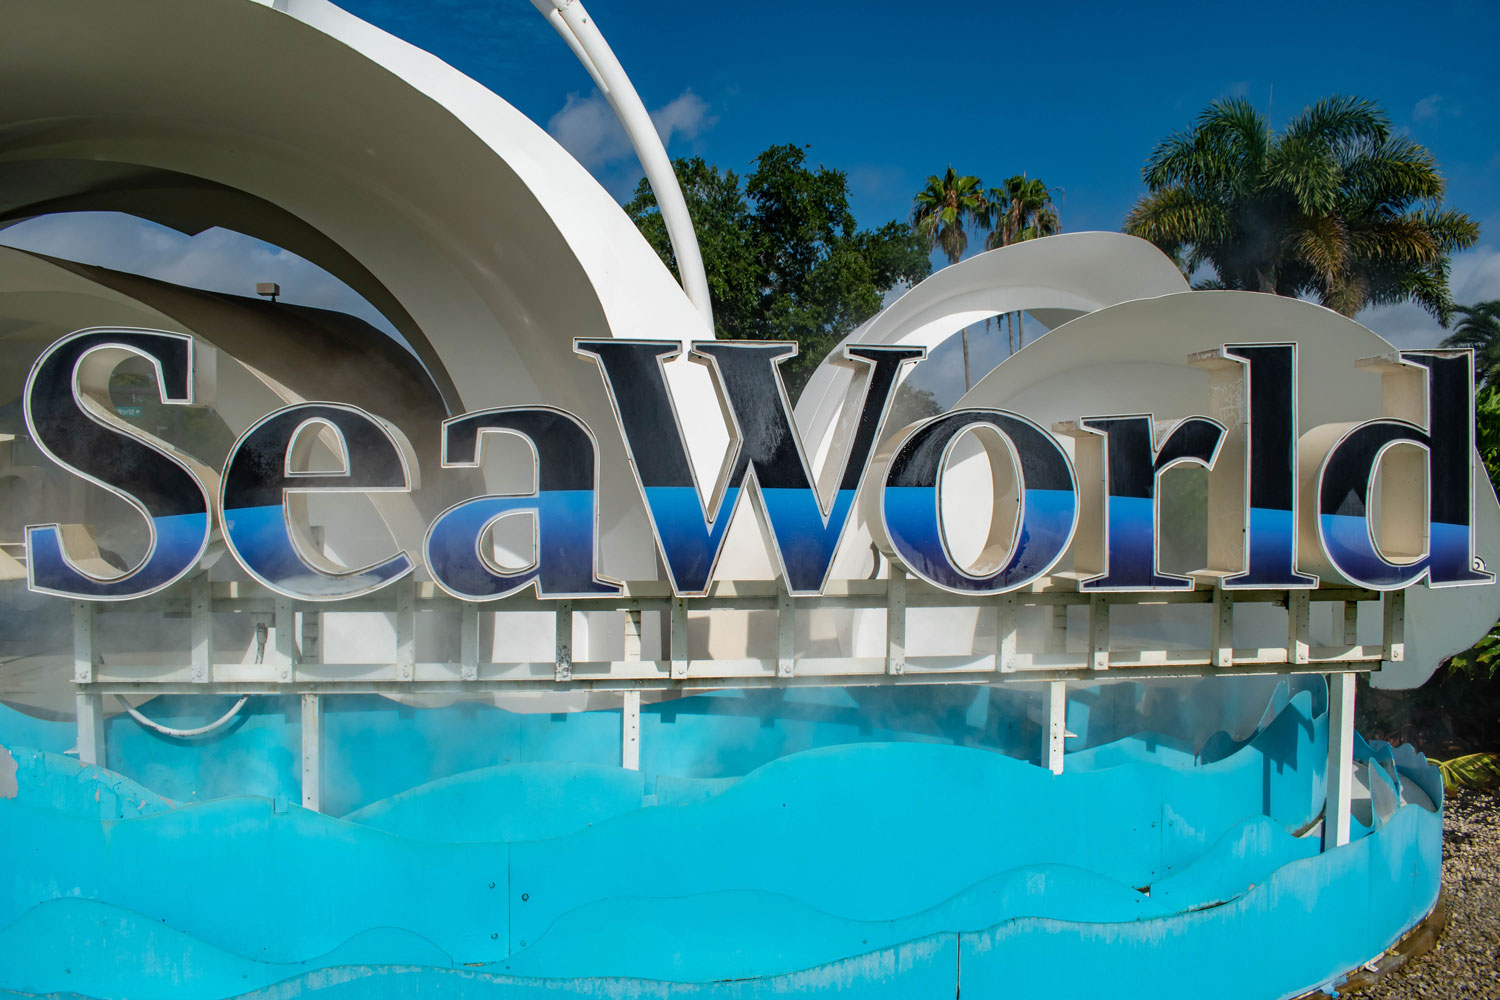 What's happening with Seaworld Abu Dhabi? | Attractions | Time Out Dubai